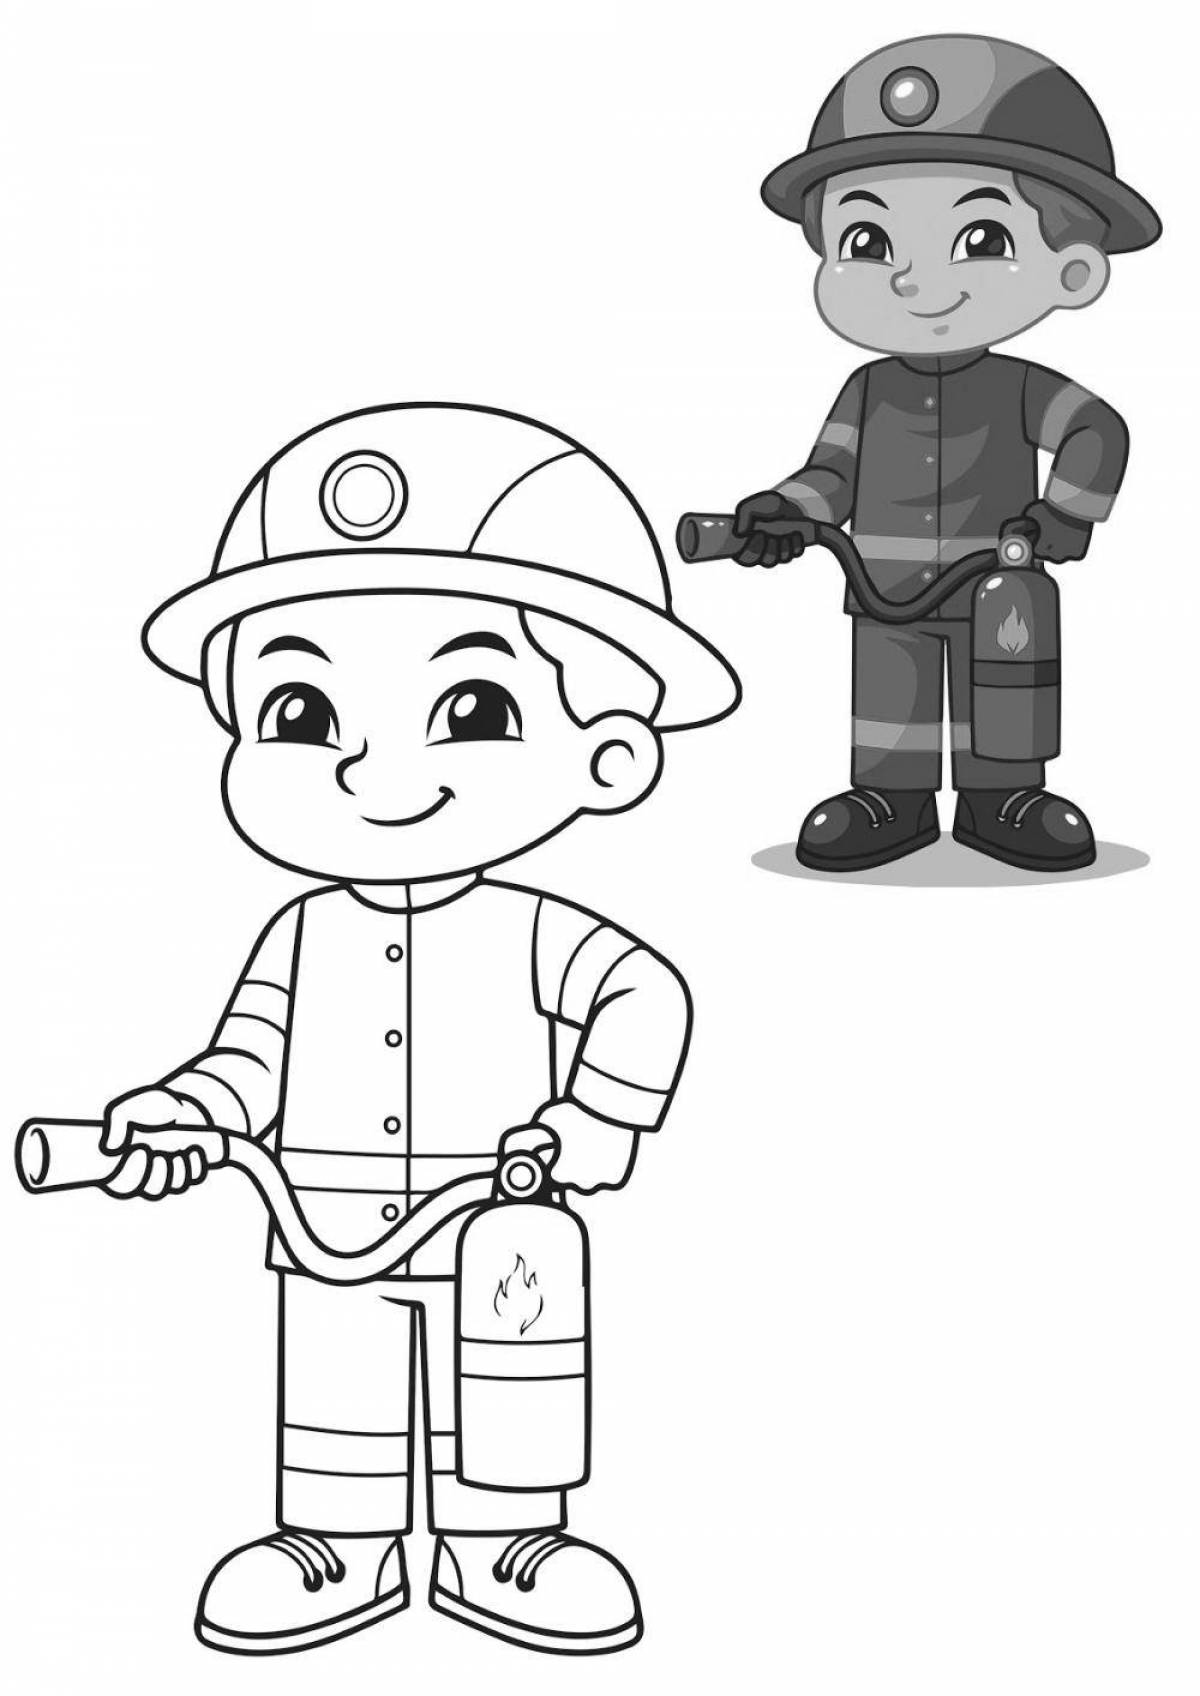 Firefighter profession coloring page